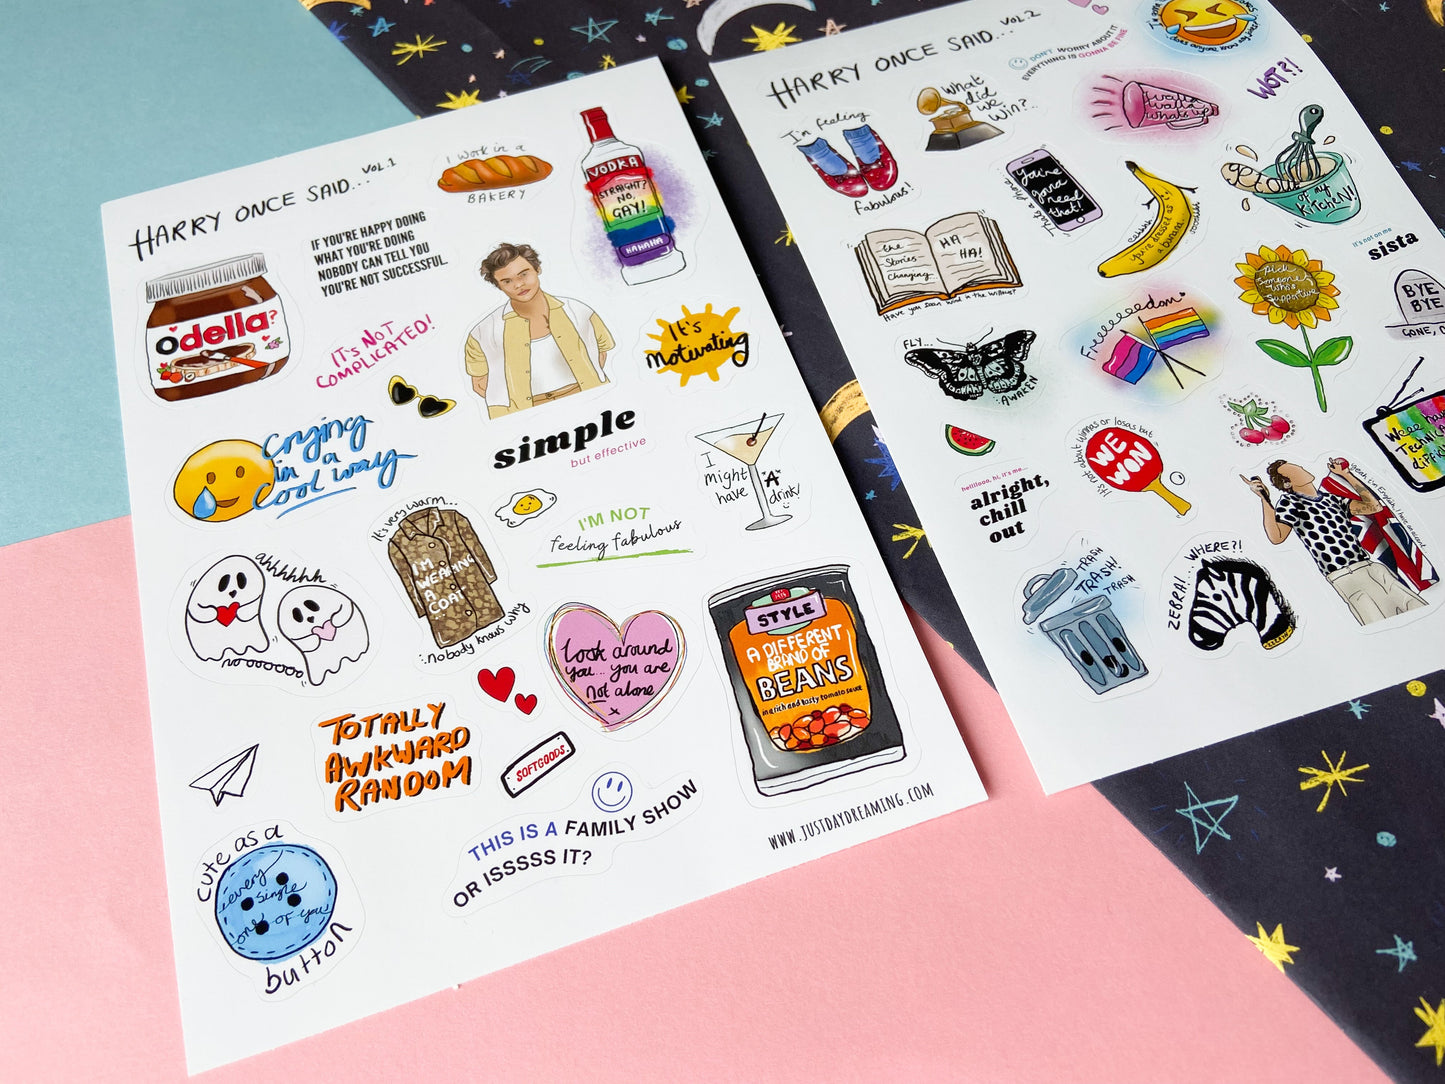 I Guess we're the Harries Sticker Set